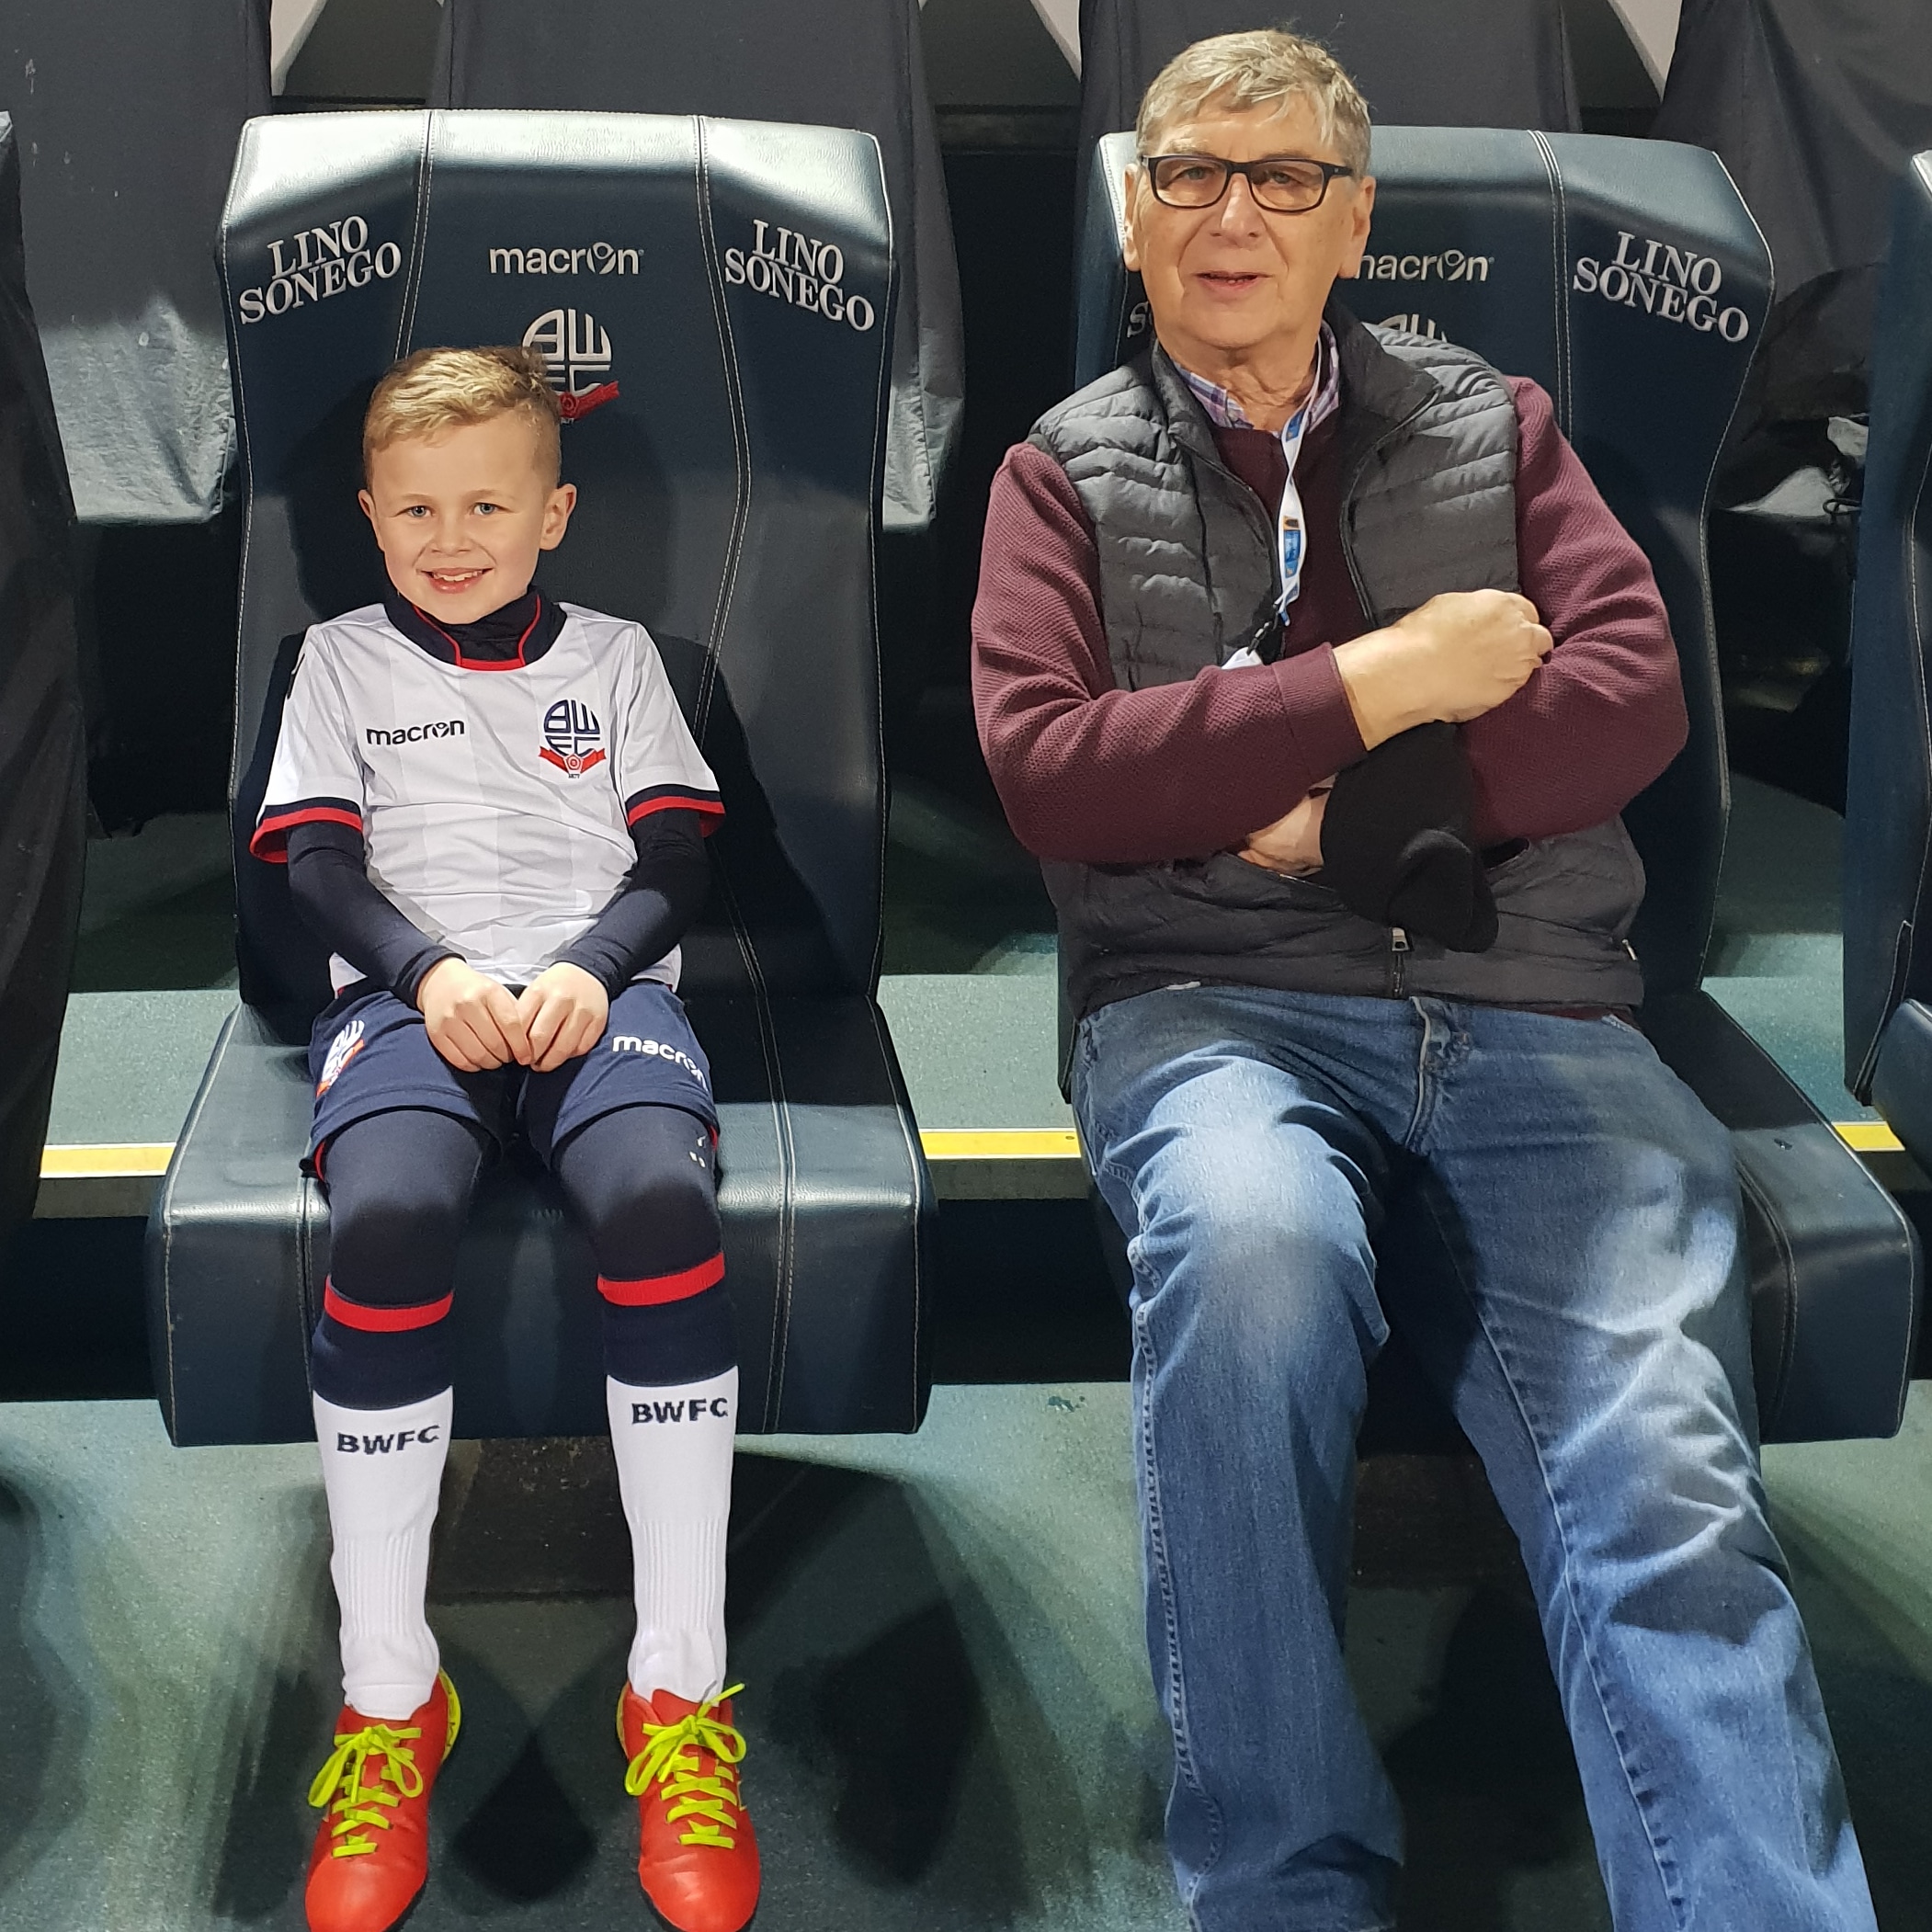 Young boy wearing a Bolton Wanderers kit, sat next to an elderly man.